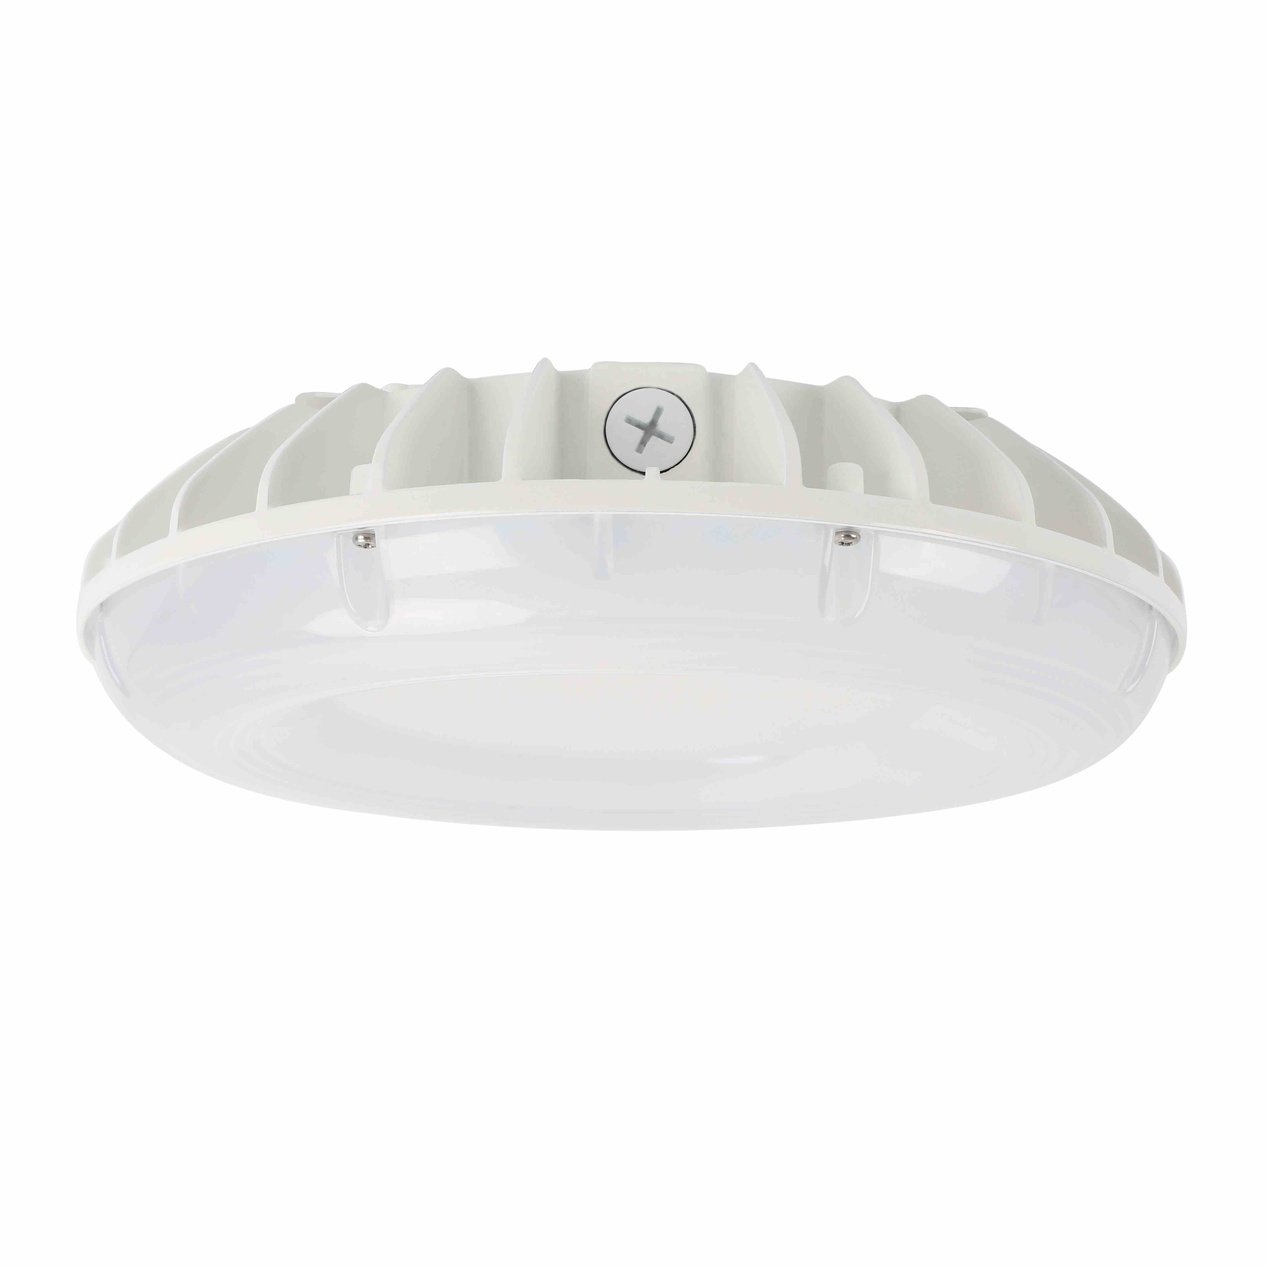 MCP03 Round LED Canopy Light, Parking Garage Lighting, 120-277VAC Dimmable, 5000K